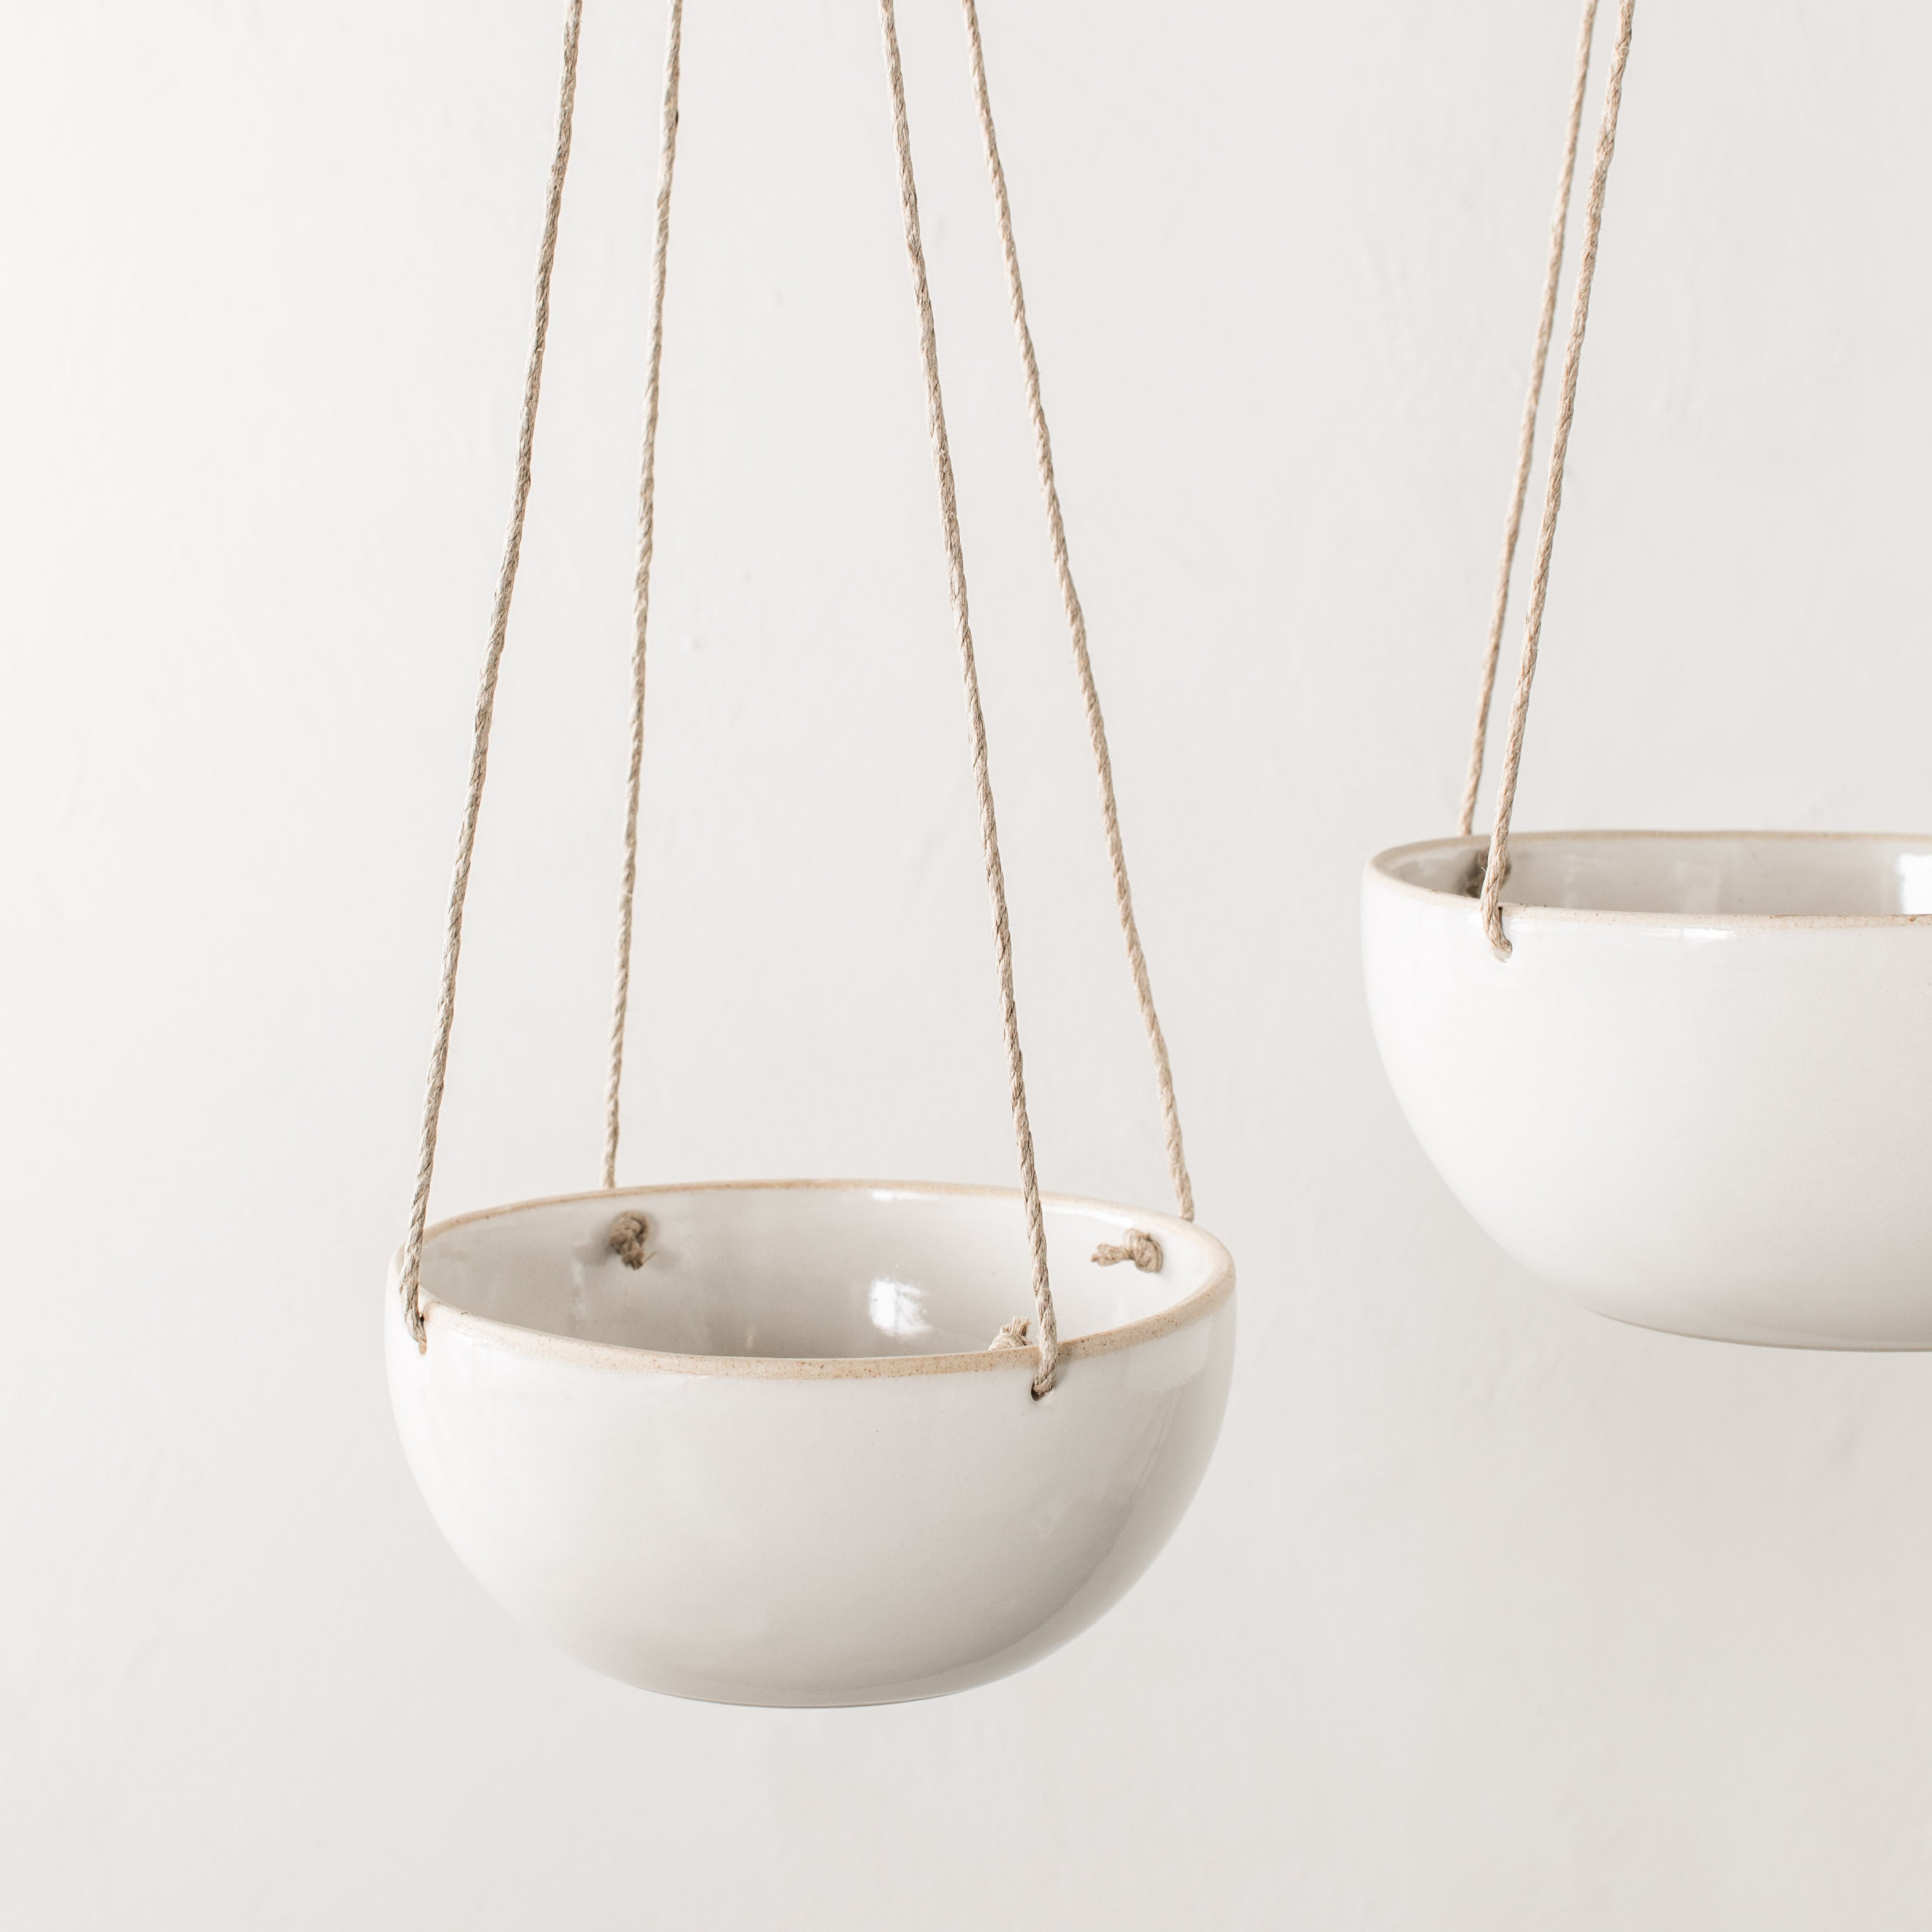 Two minimal ceramic hanging planter. From left to right, 4 inch plater with a plant hangs by a tan hemp cord next to a hanging 6 inch planter. Close up image. Handmade ceramic hanging planter, designed and sold by Convivial Production, Kansas City ceramics. 